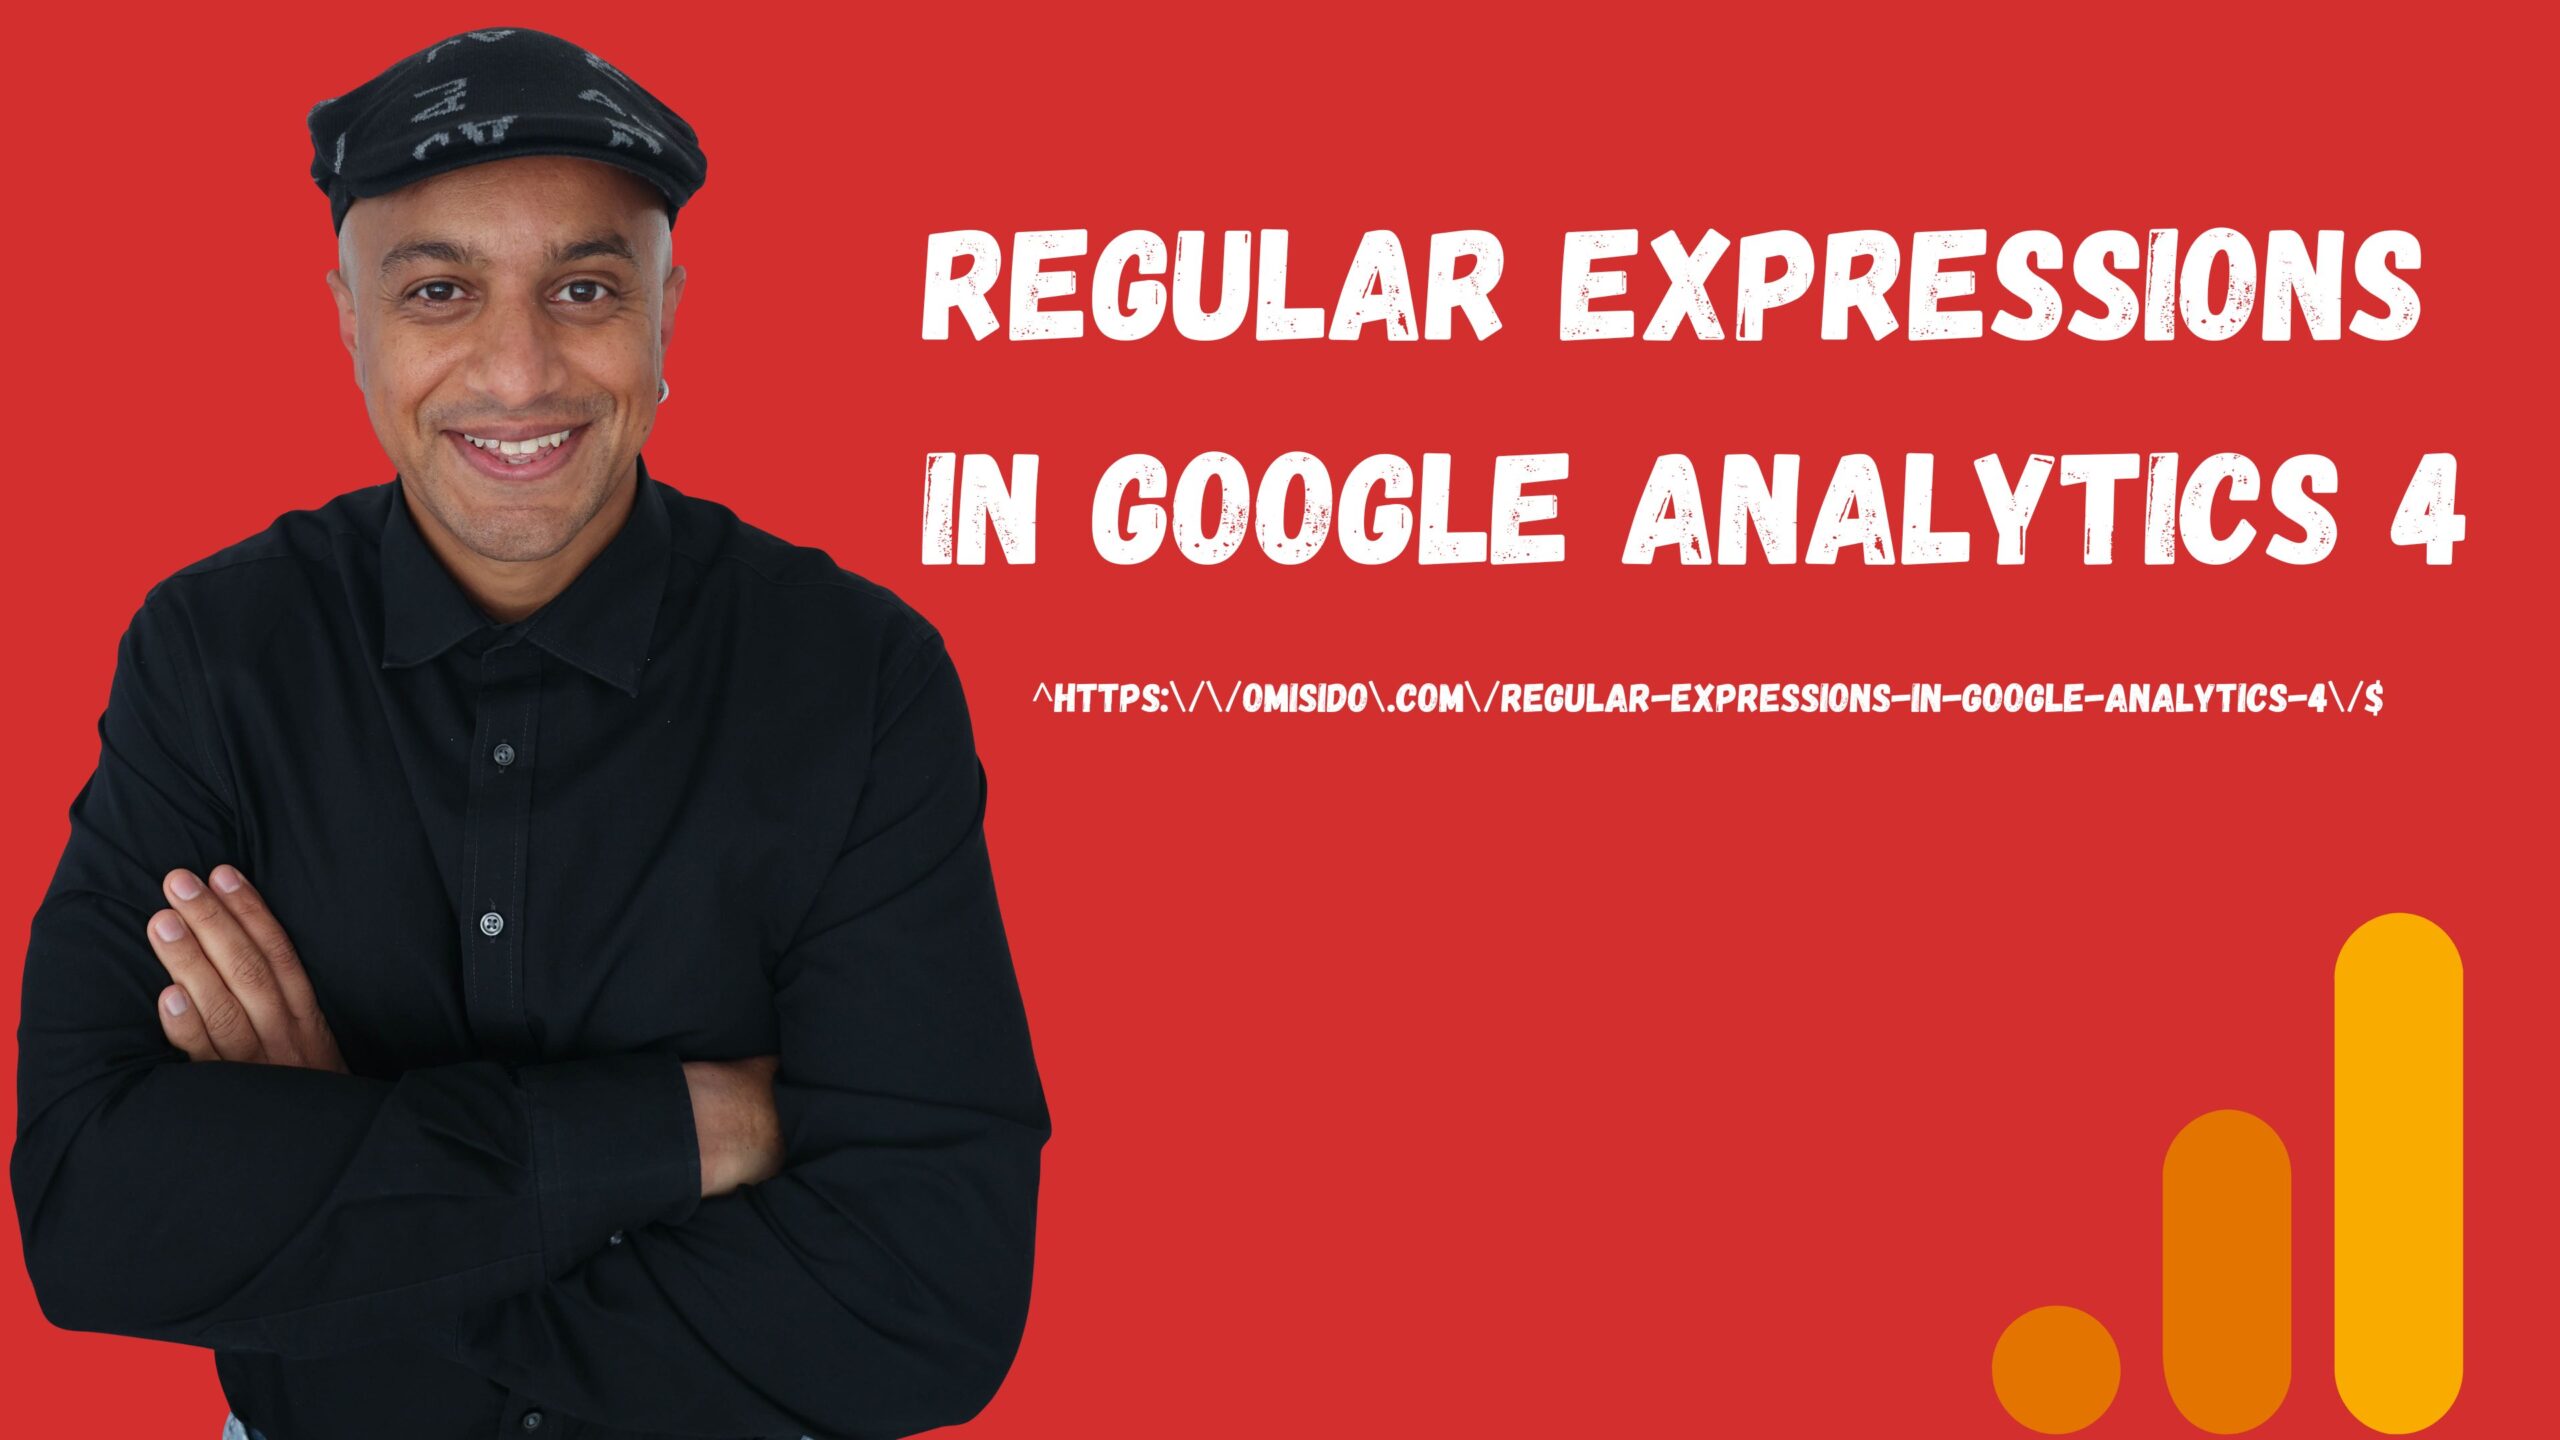 Regular Expressions in Google Analytics 4: What You Need to Know